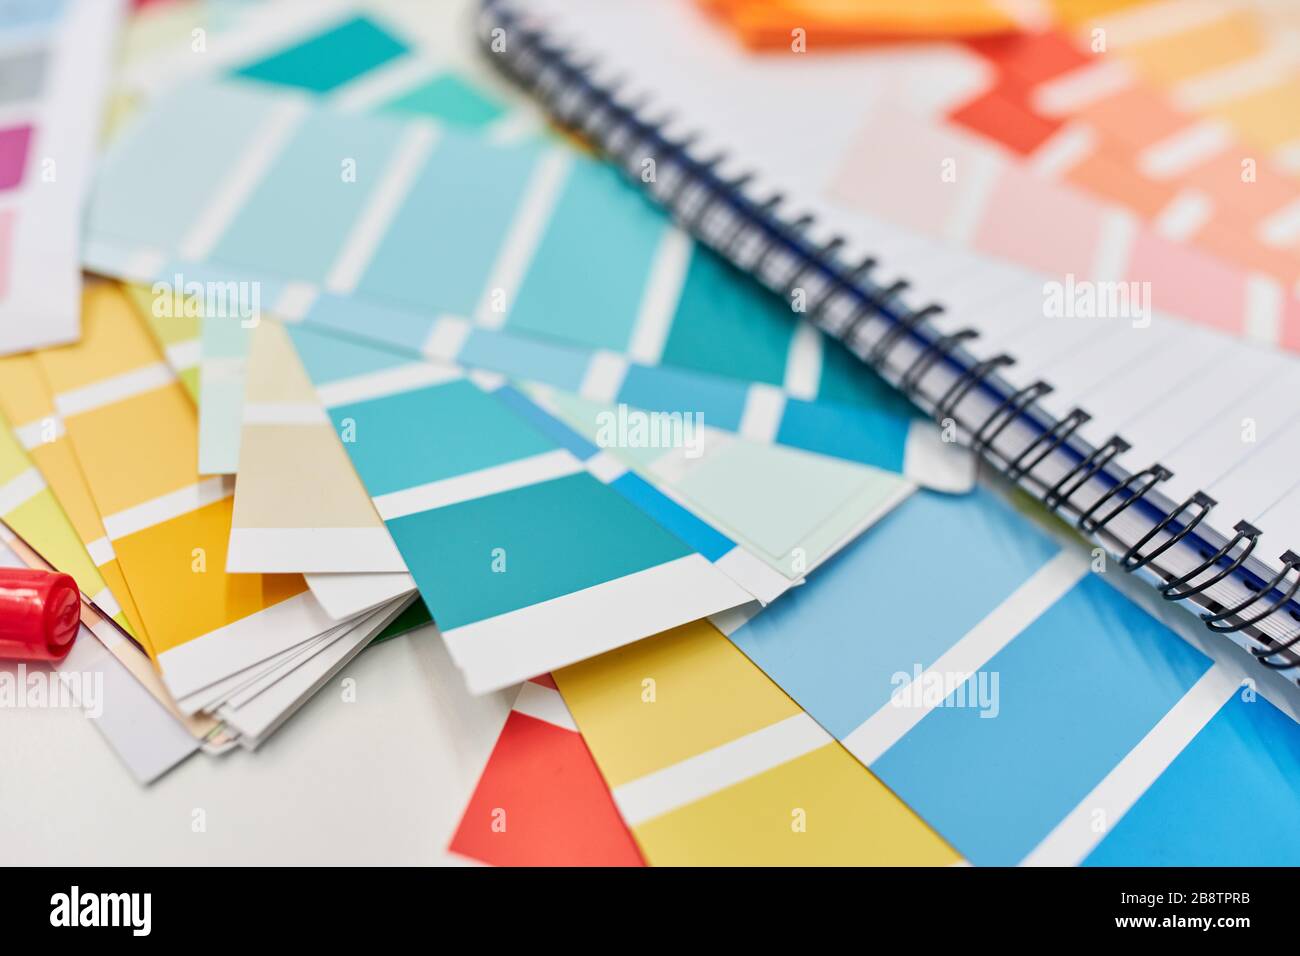 Color samples and color palette as materials for graphic design and color design Stock Photo